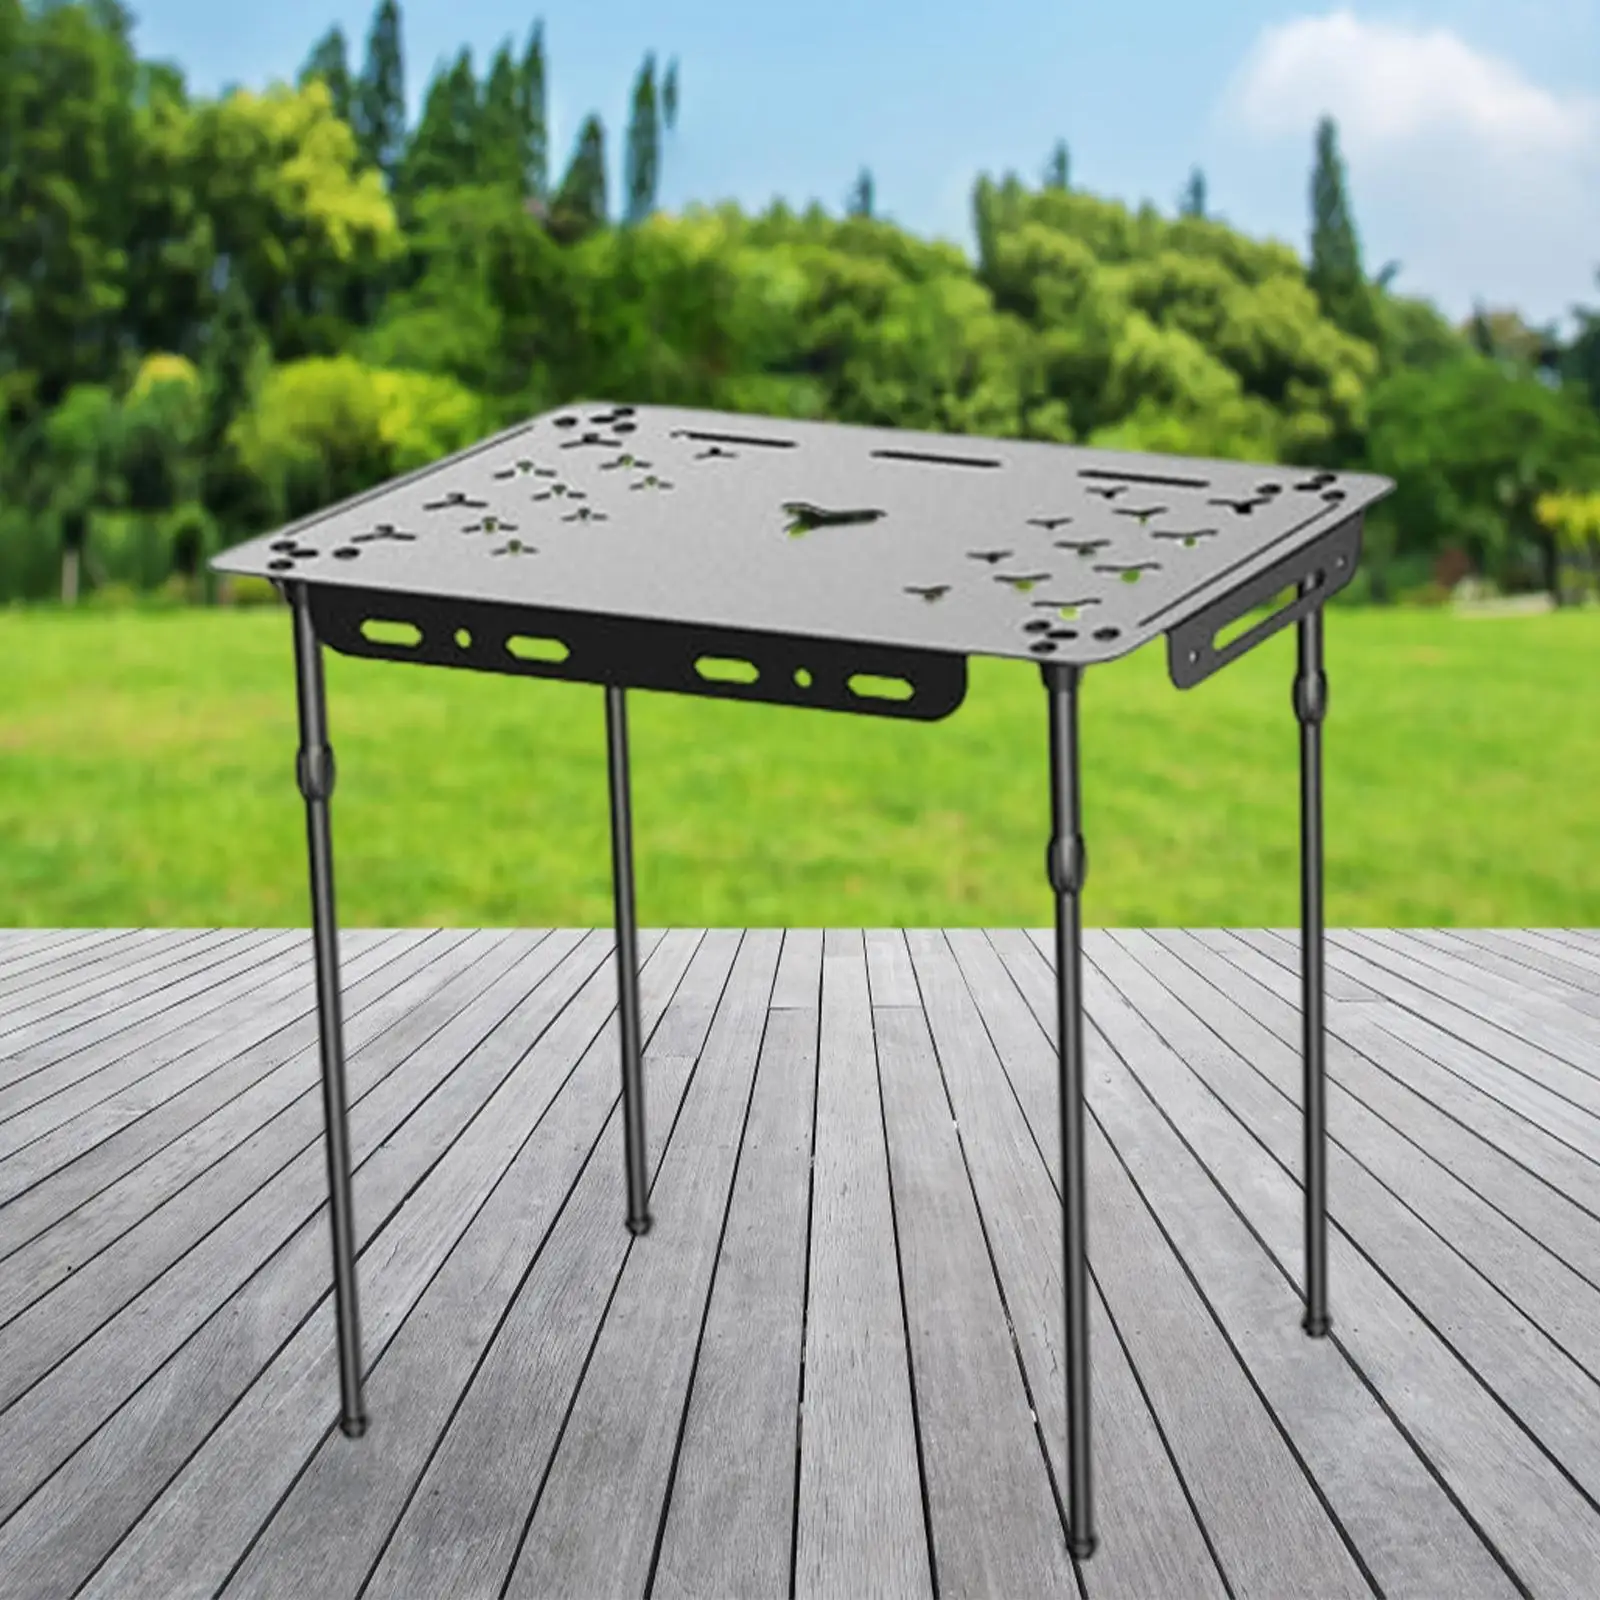 Portable Camping Foldable Table Rack Collapsible Desk Heavy Duty Furniture Tableware for Picnic Outdoor Traveling Cooking Beach